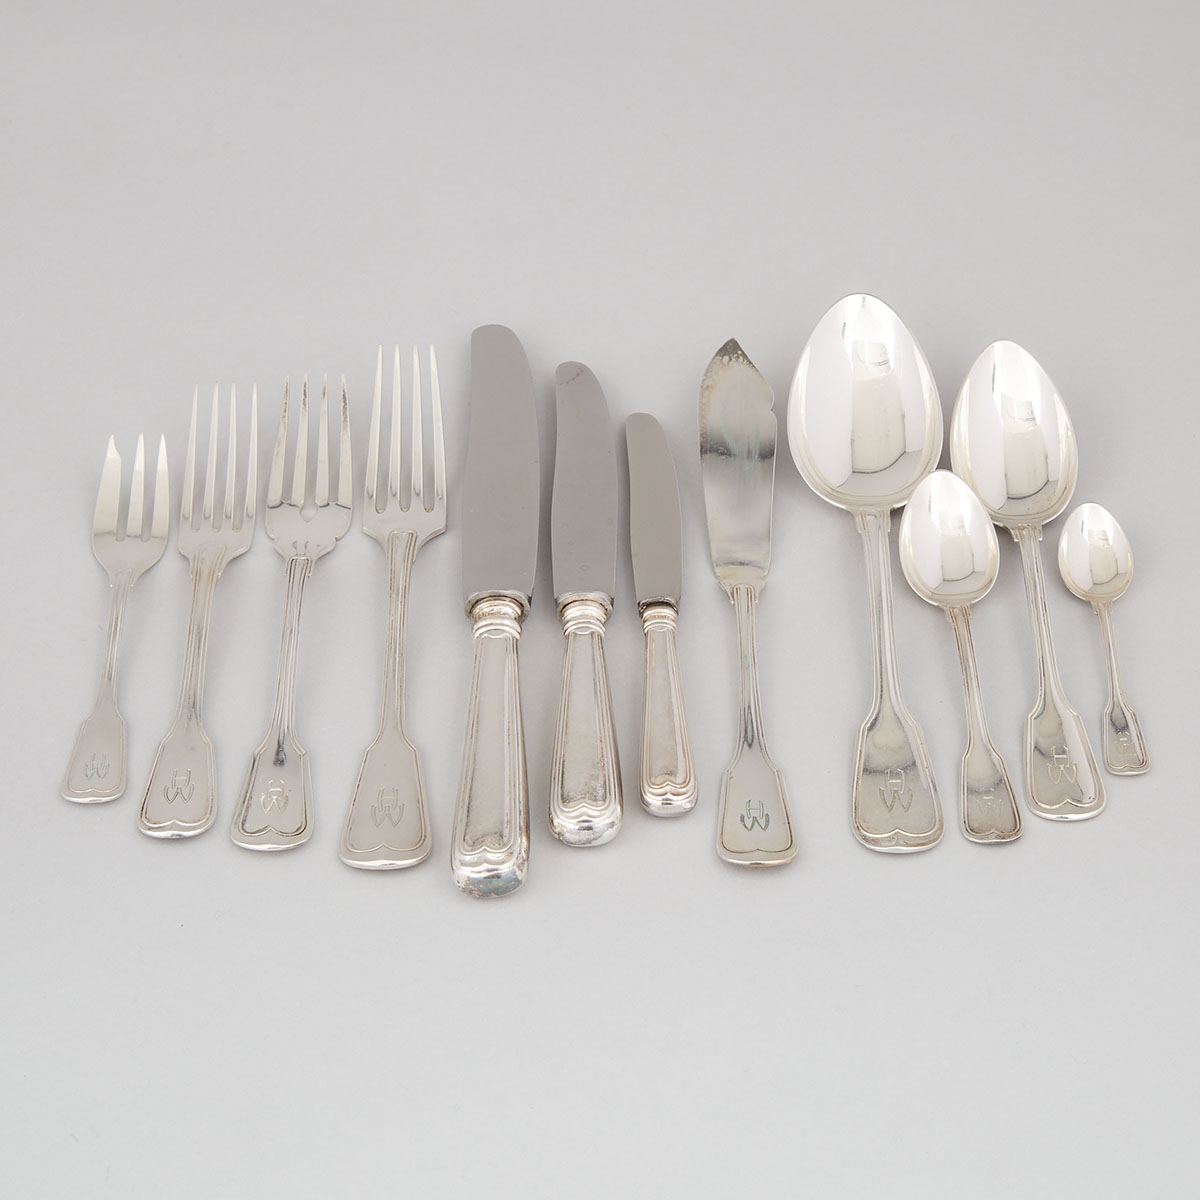 German Silver Assembled Fiddle and Thread Pattern Flatware Service, 20th century